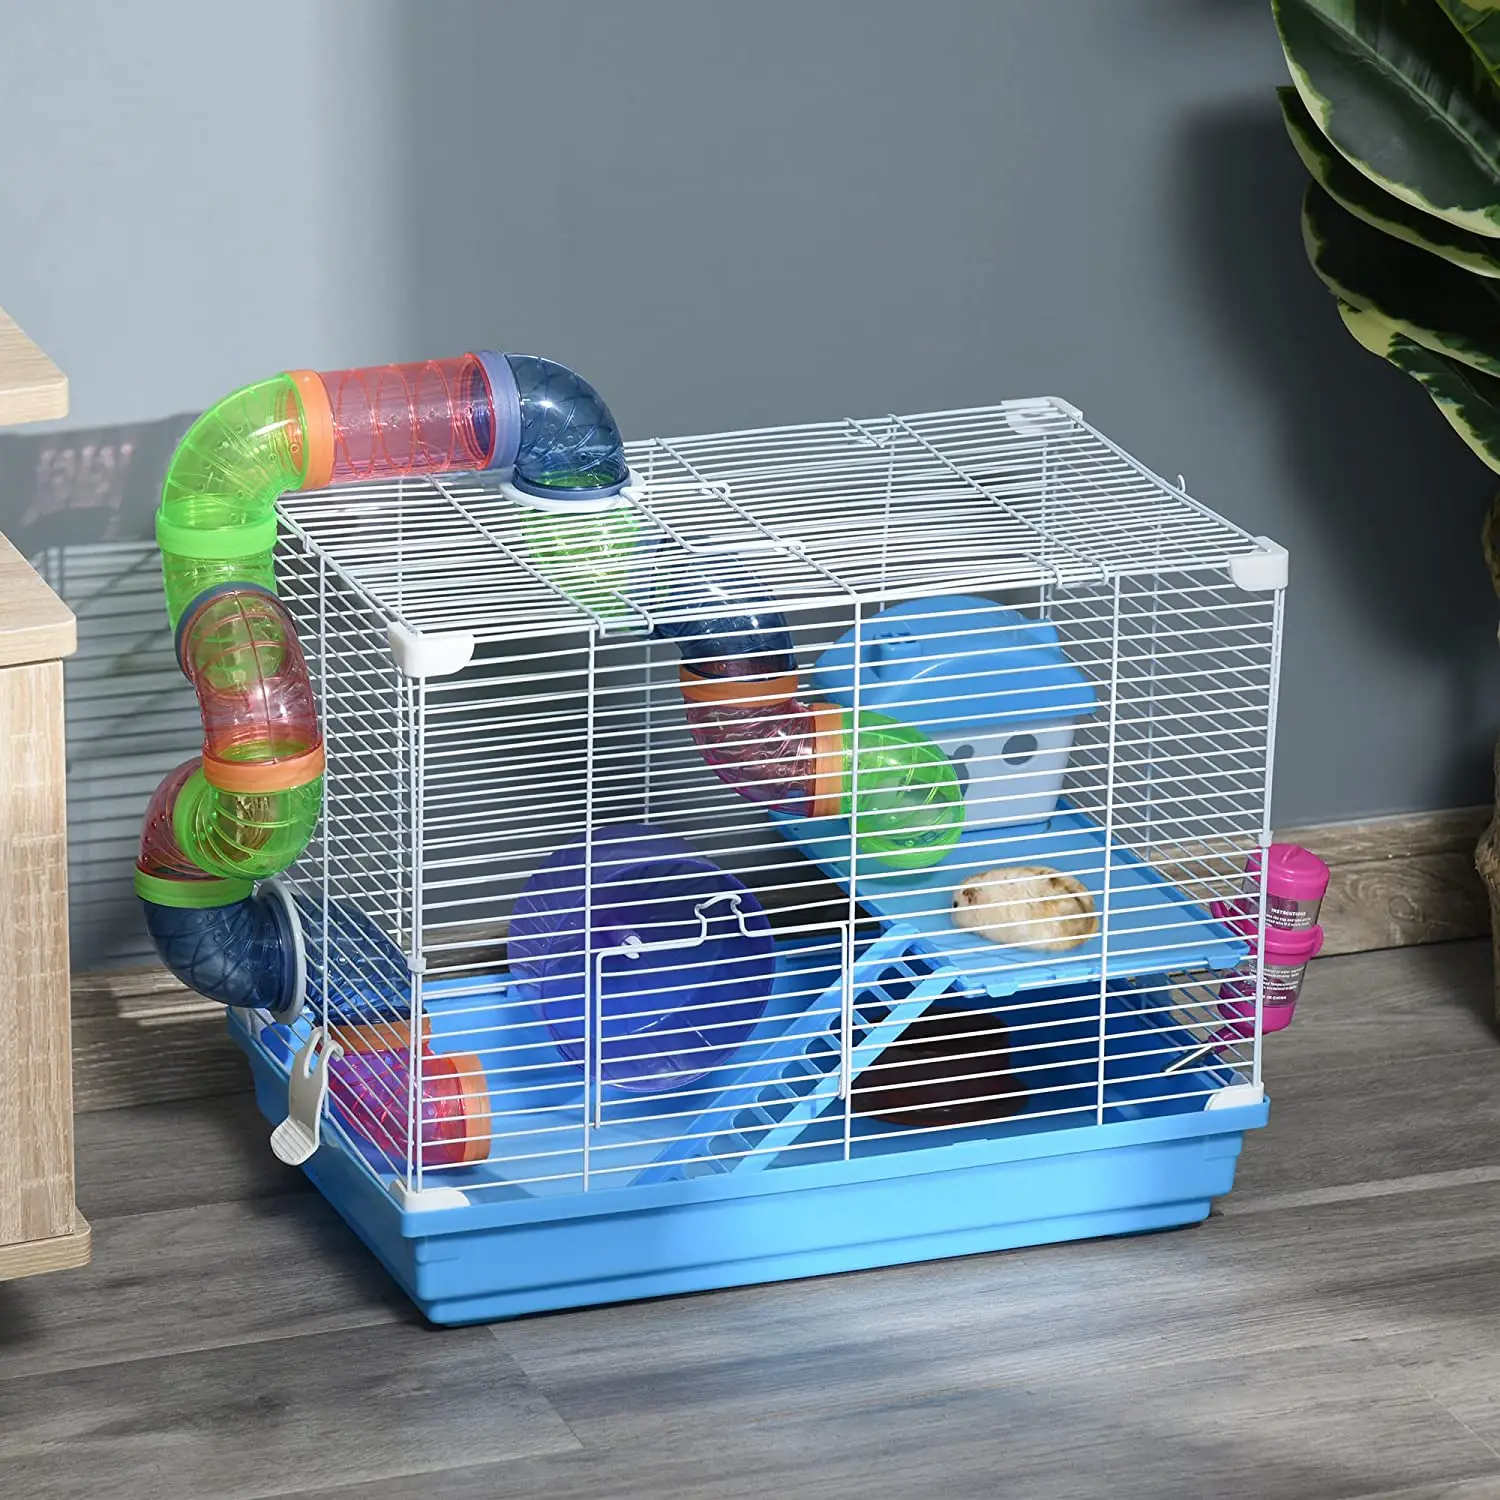 Wire Cages | The Best Housing Options For Your Hamster